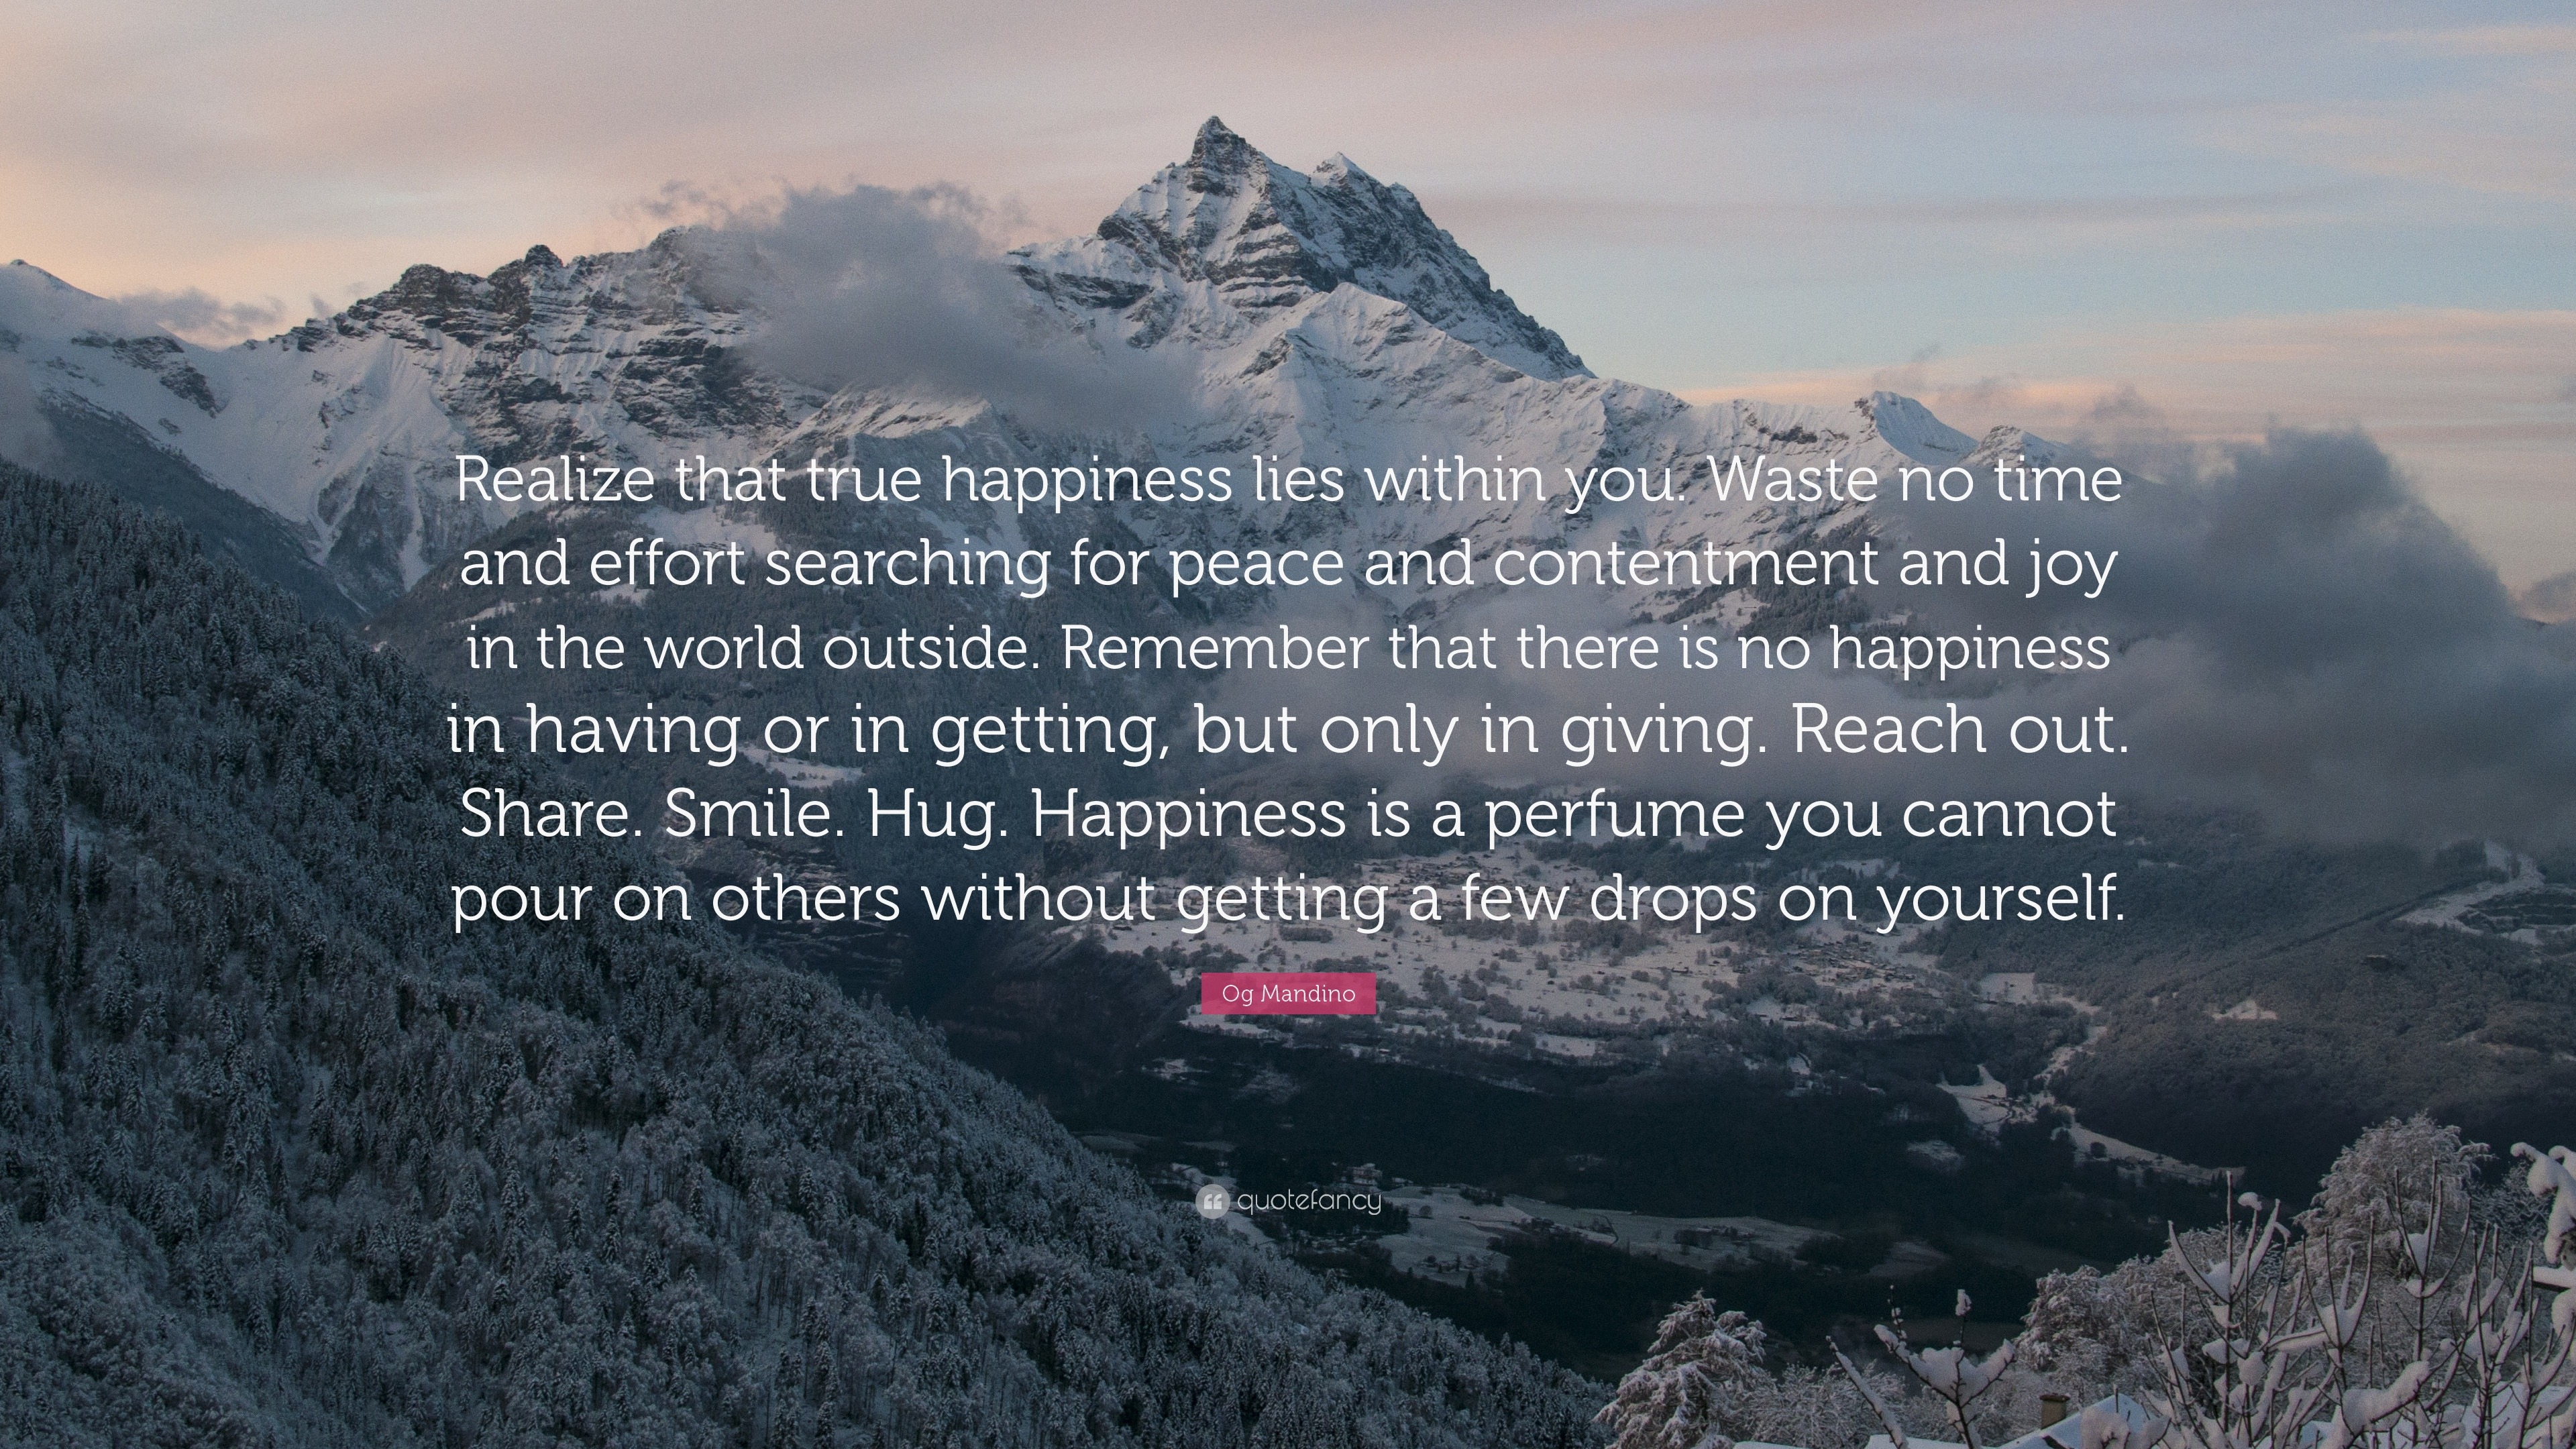 Og Mandino Quote: "Realize that true happiness lies within ...